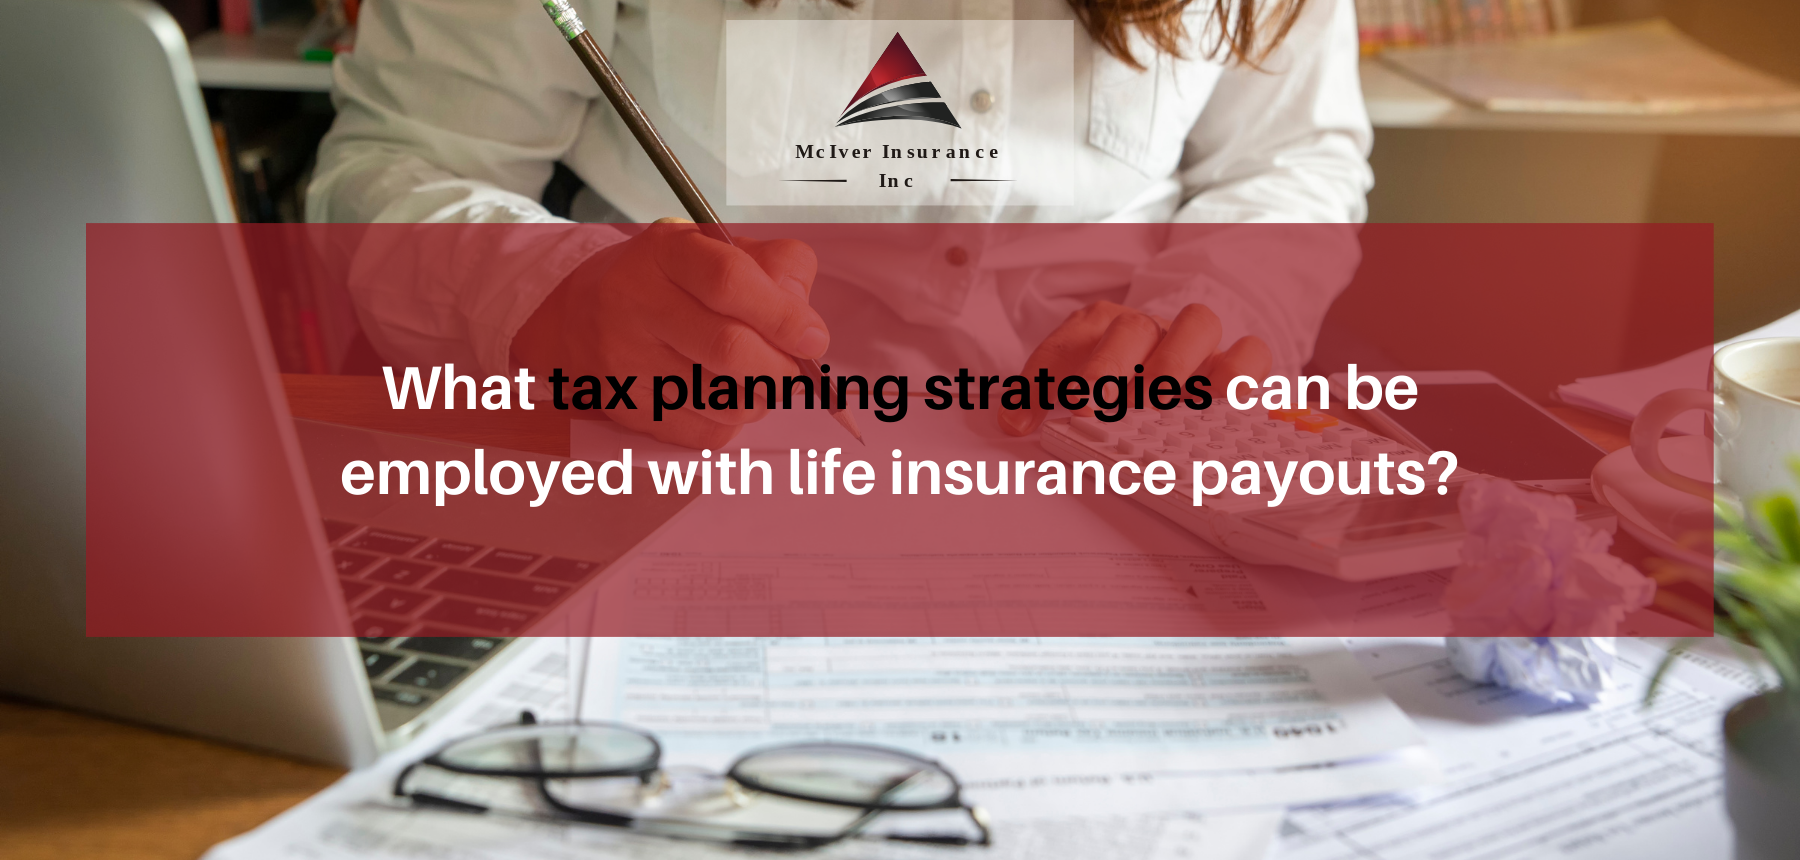 What tax planning strategies can be employed with life insurance payouts